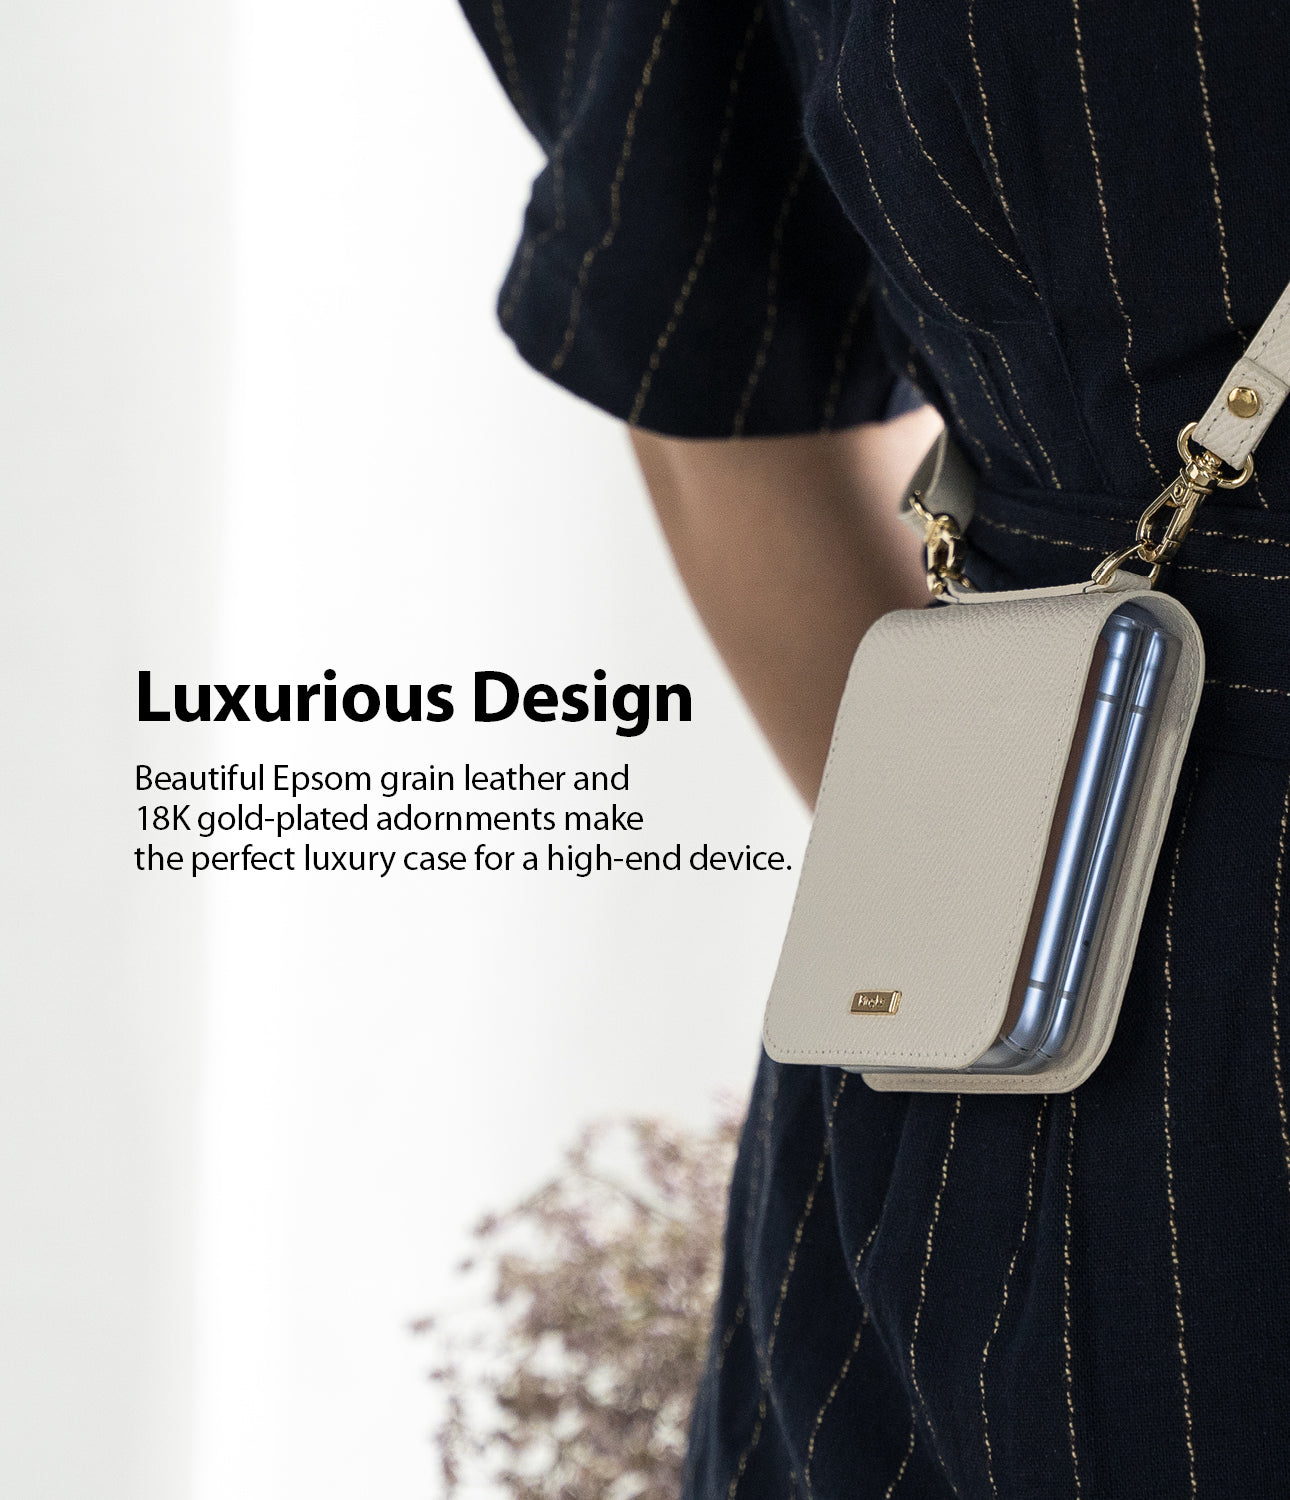 luxurious design - epsom grain leather and 19k gold plated adornment make the perfect luxury case for a high-end device